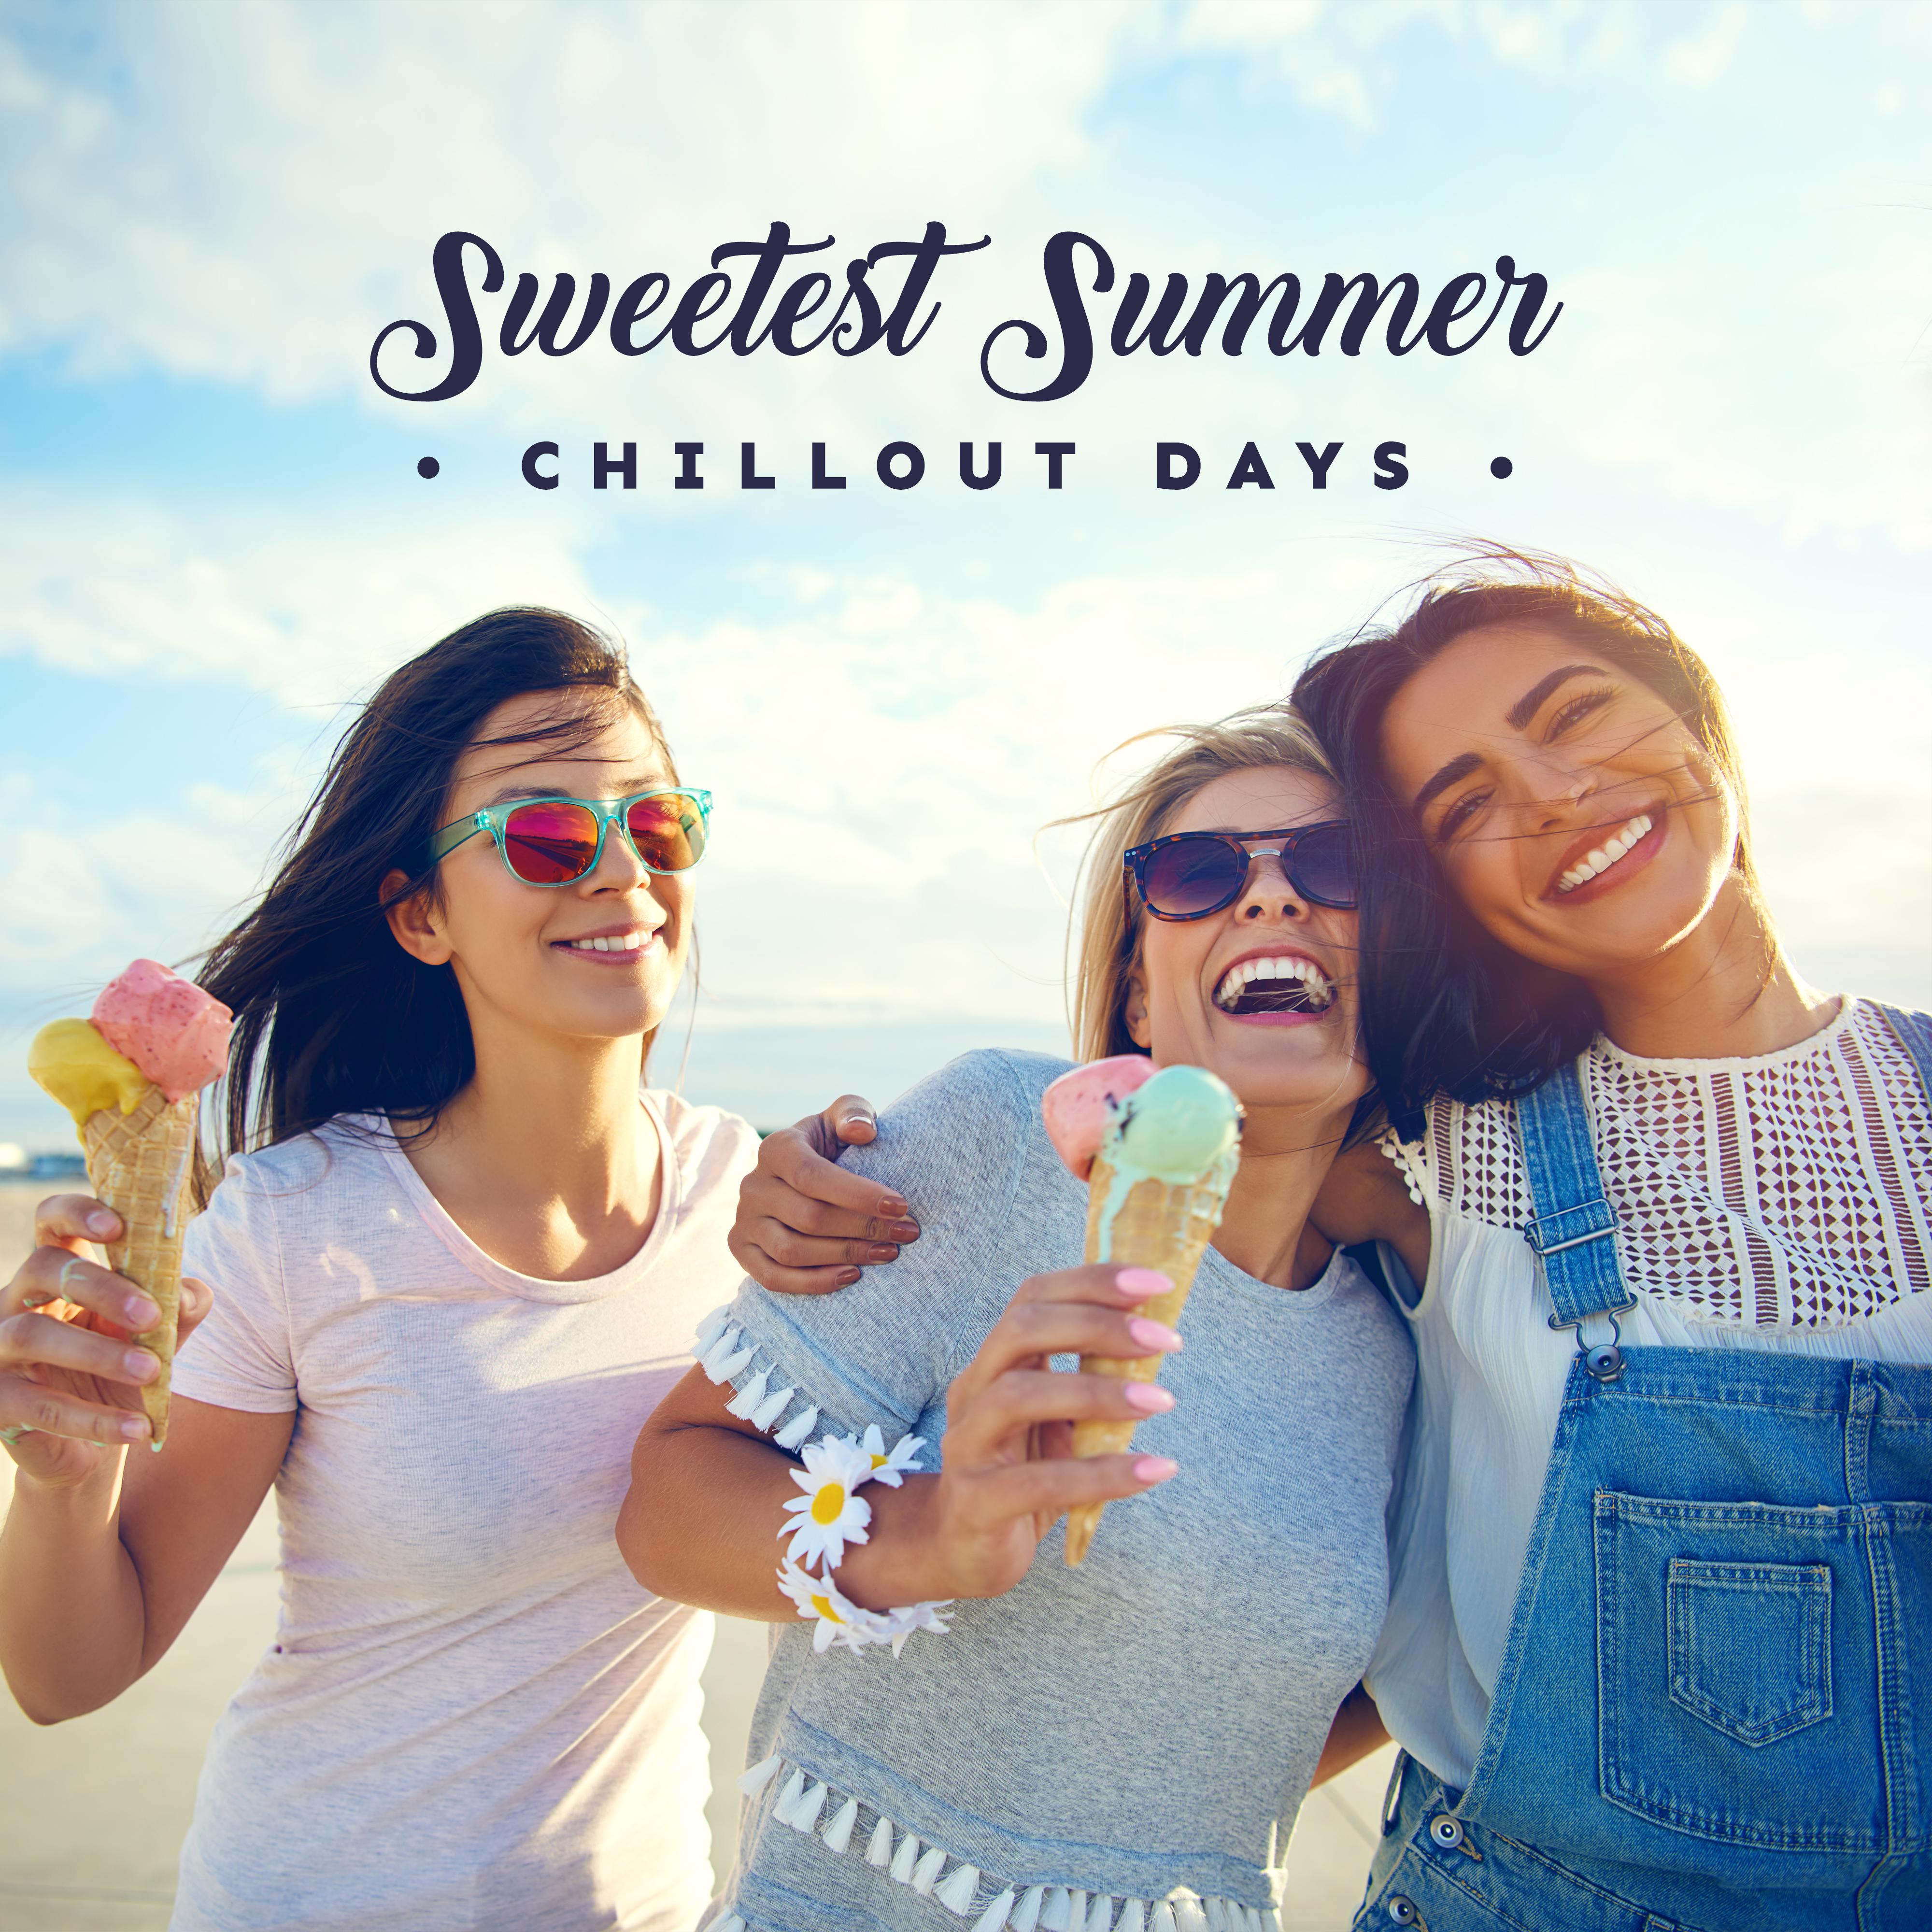 Sweetest Summer Chillout Days: 2019 Perfect Mix of Best Chill Out Music for Celebrating Summer Vacation, Most Relaxing Beats for Lying on the Beach, Sun Salutation, Sunny Holiday Songs